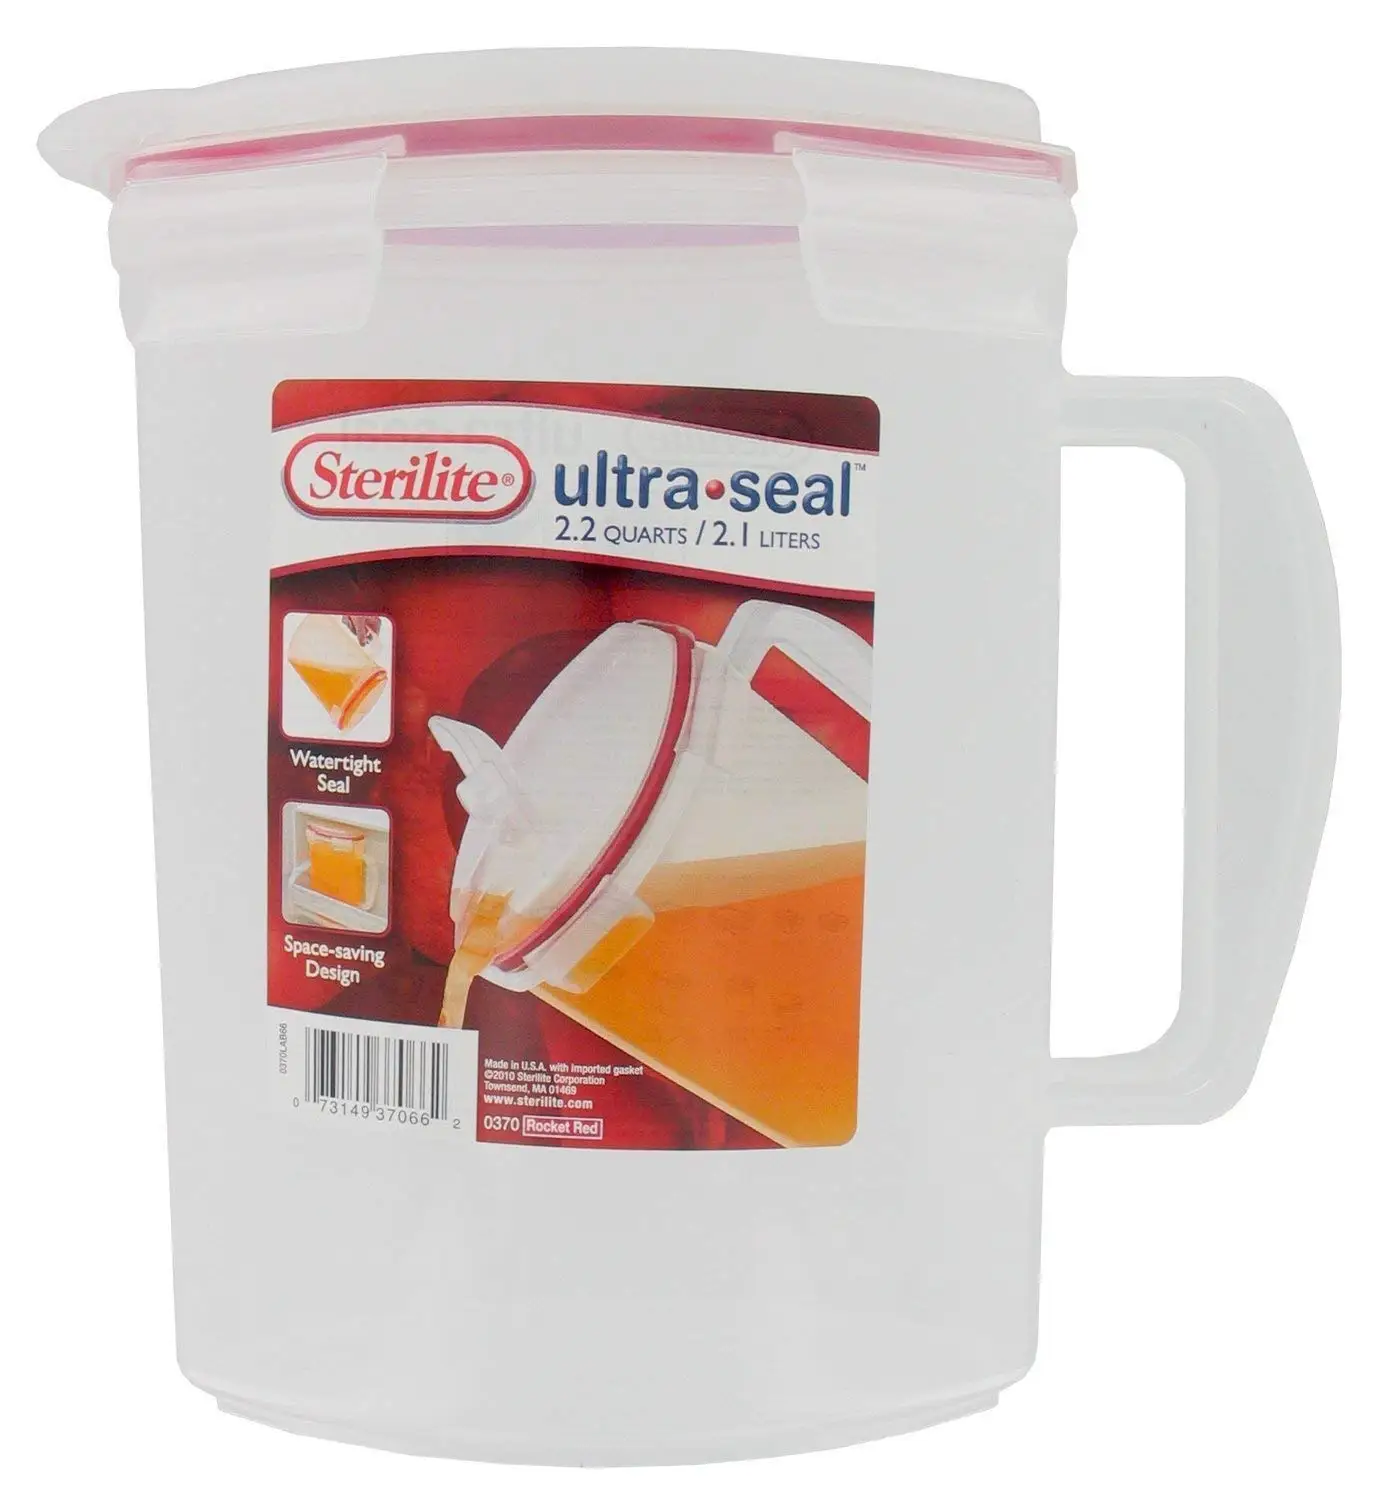 Clear Lid and Base with Rocket Red Gasket Sterilite 03706606 Ultra-Seal 2.2 Quart Pitcher 6-Pack